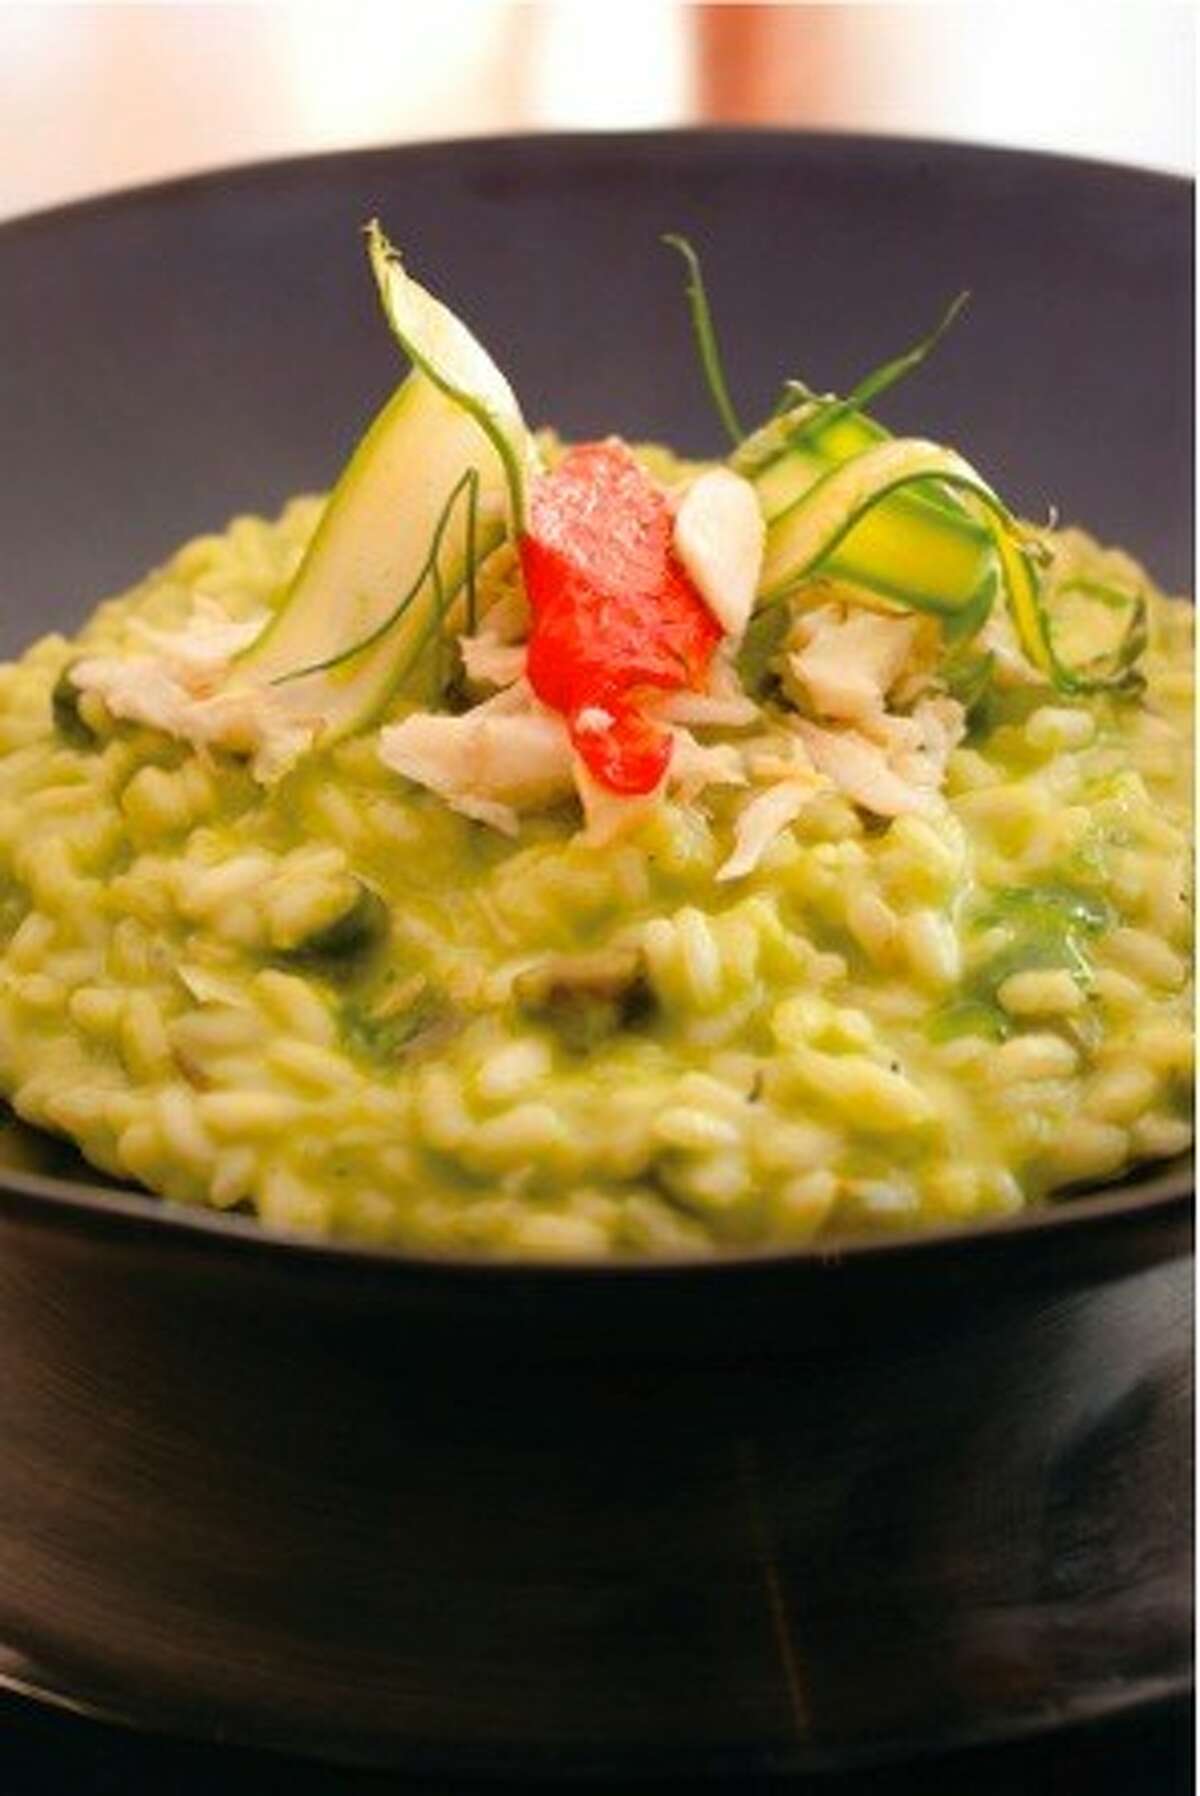 Green Asparagus Risotto with Lump Crab Meat